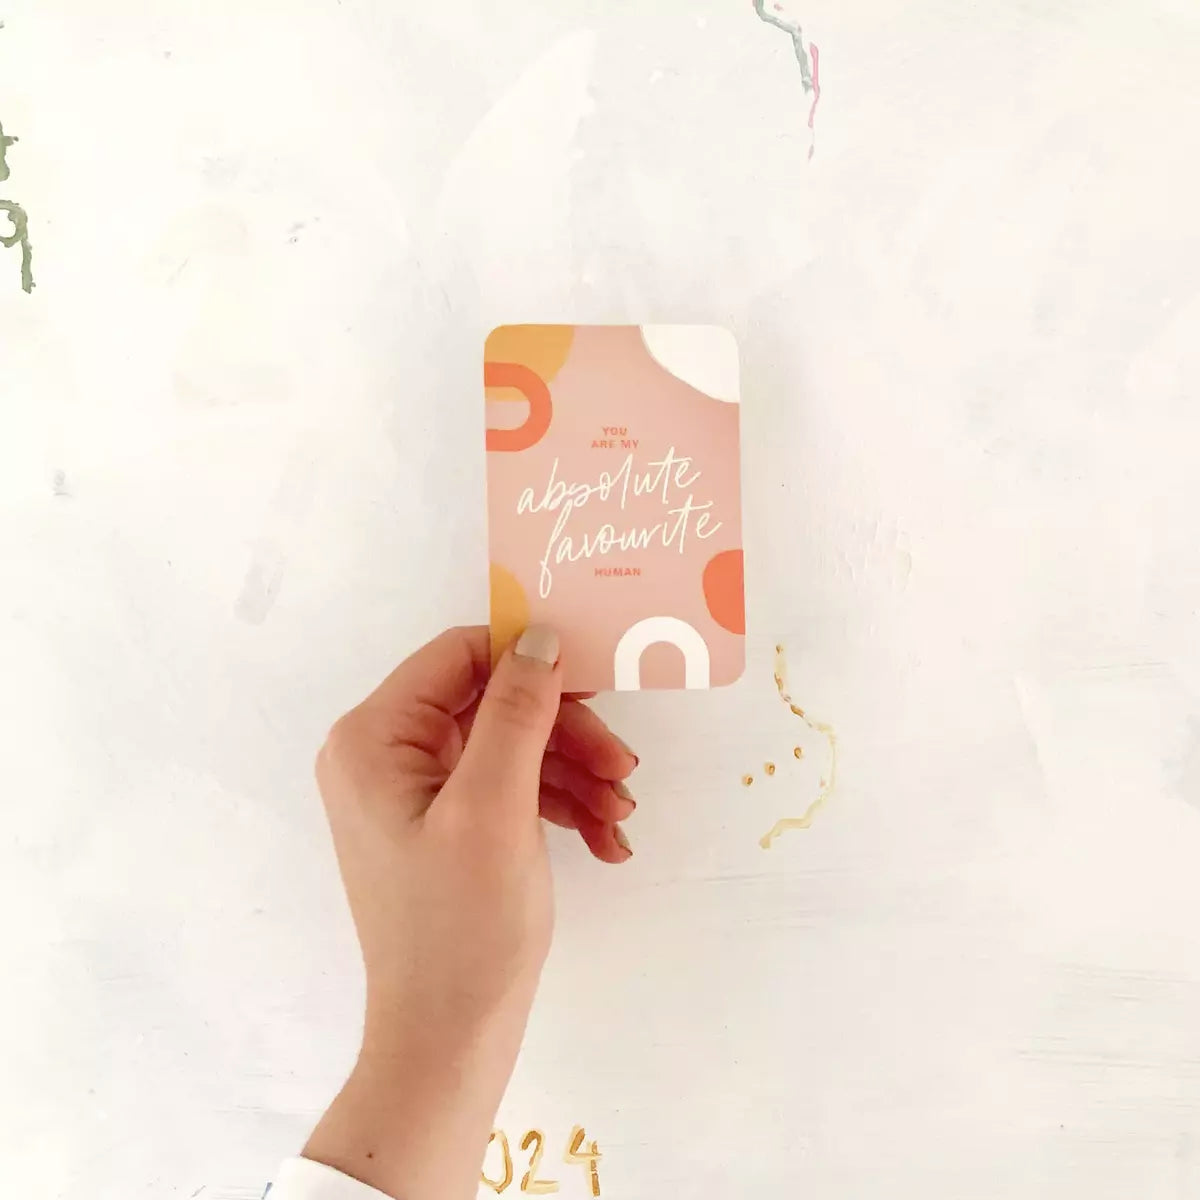 A person holding up a Kindness Card from Collective Hub, with the words "happy little mama", aiming to brighten someone's day and bring an unexpected smile.